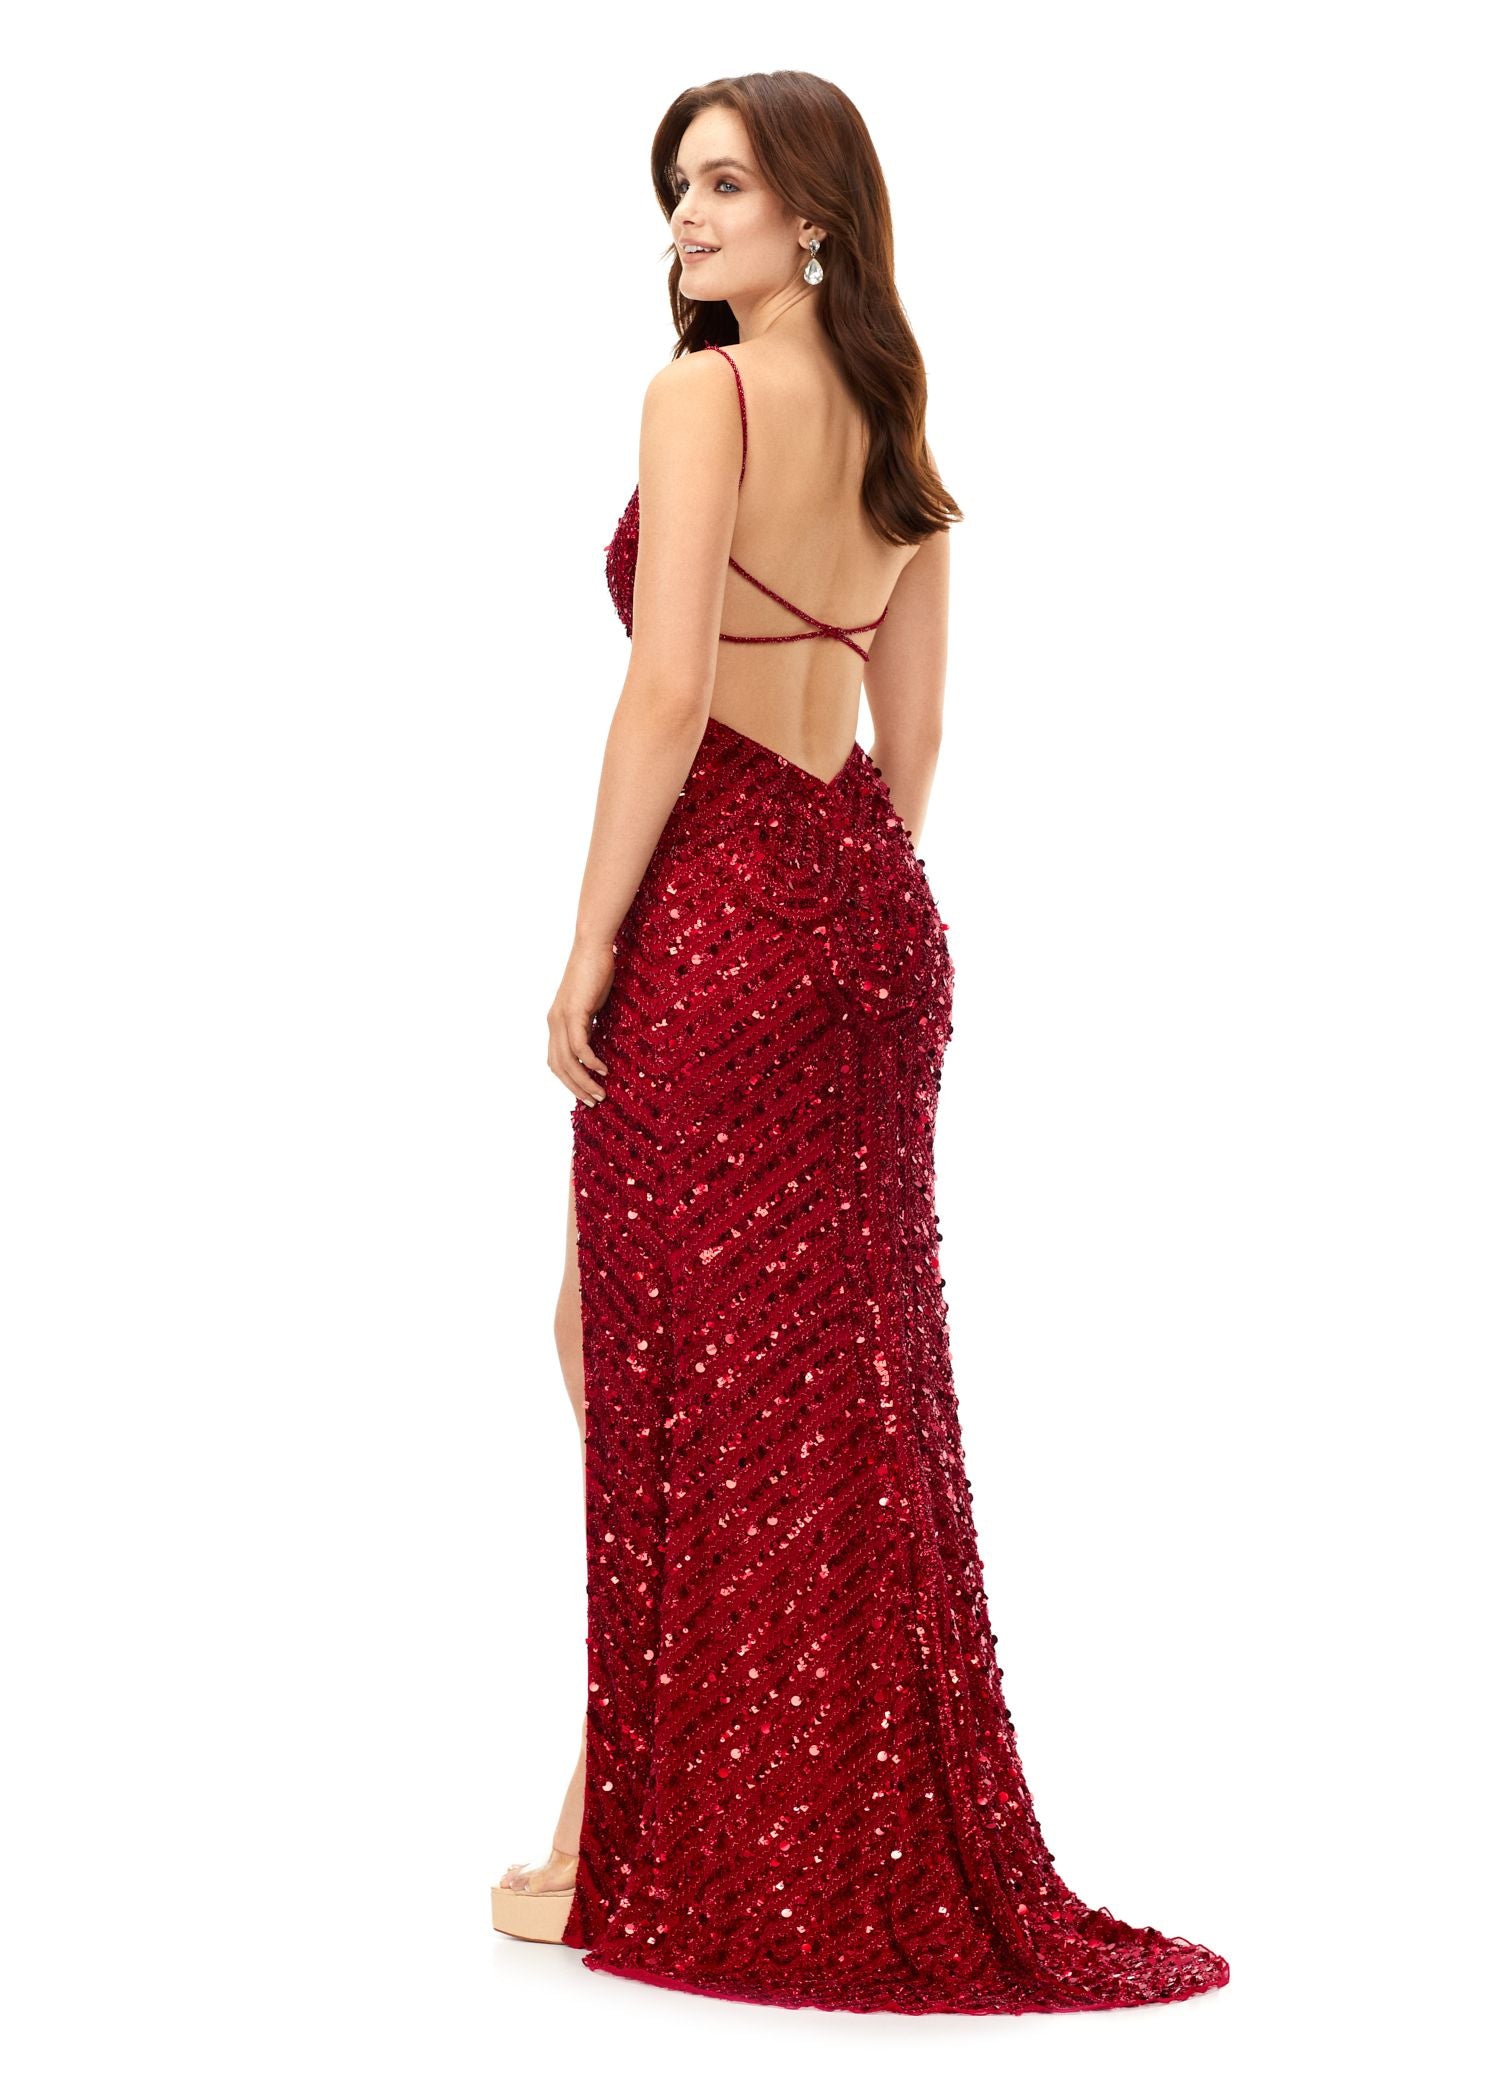 Ashley Lauren 11363 This stunning gown is hand beaded with sequins in an intricate, detailed pattern. Featuring an open back and spaghetti straps, the dress is complete with a left leg slit. Sweetheart Neckline Spaghetti Straps Open Back Left Leg Slit COLORS: Hot Pink, Red, Black, Gold